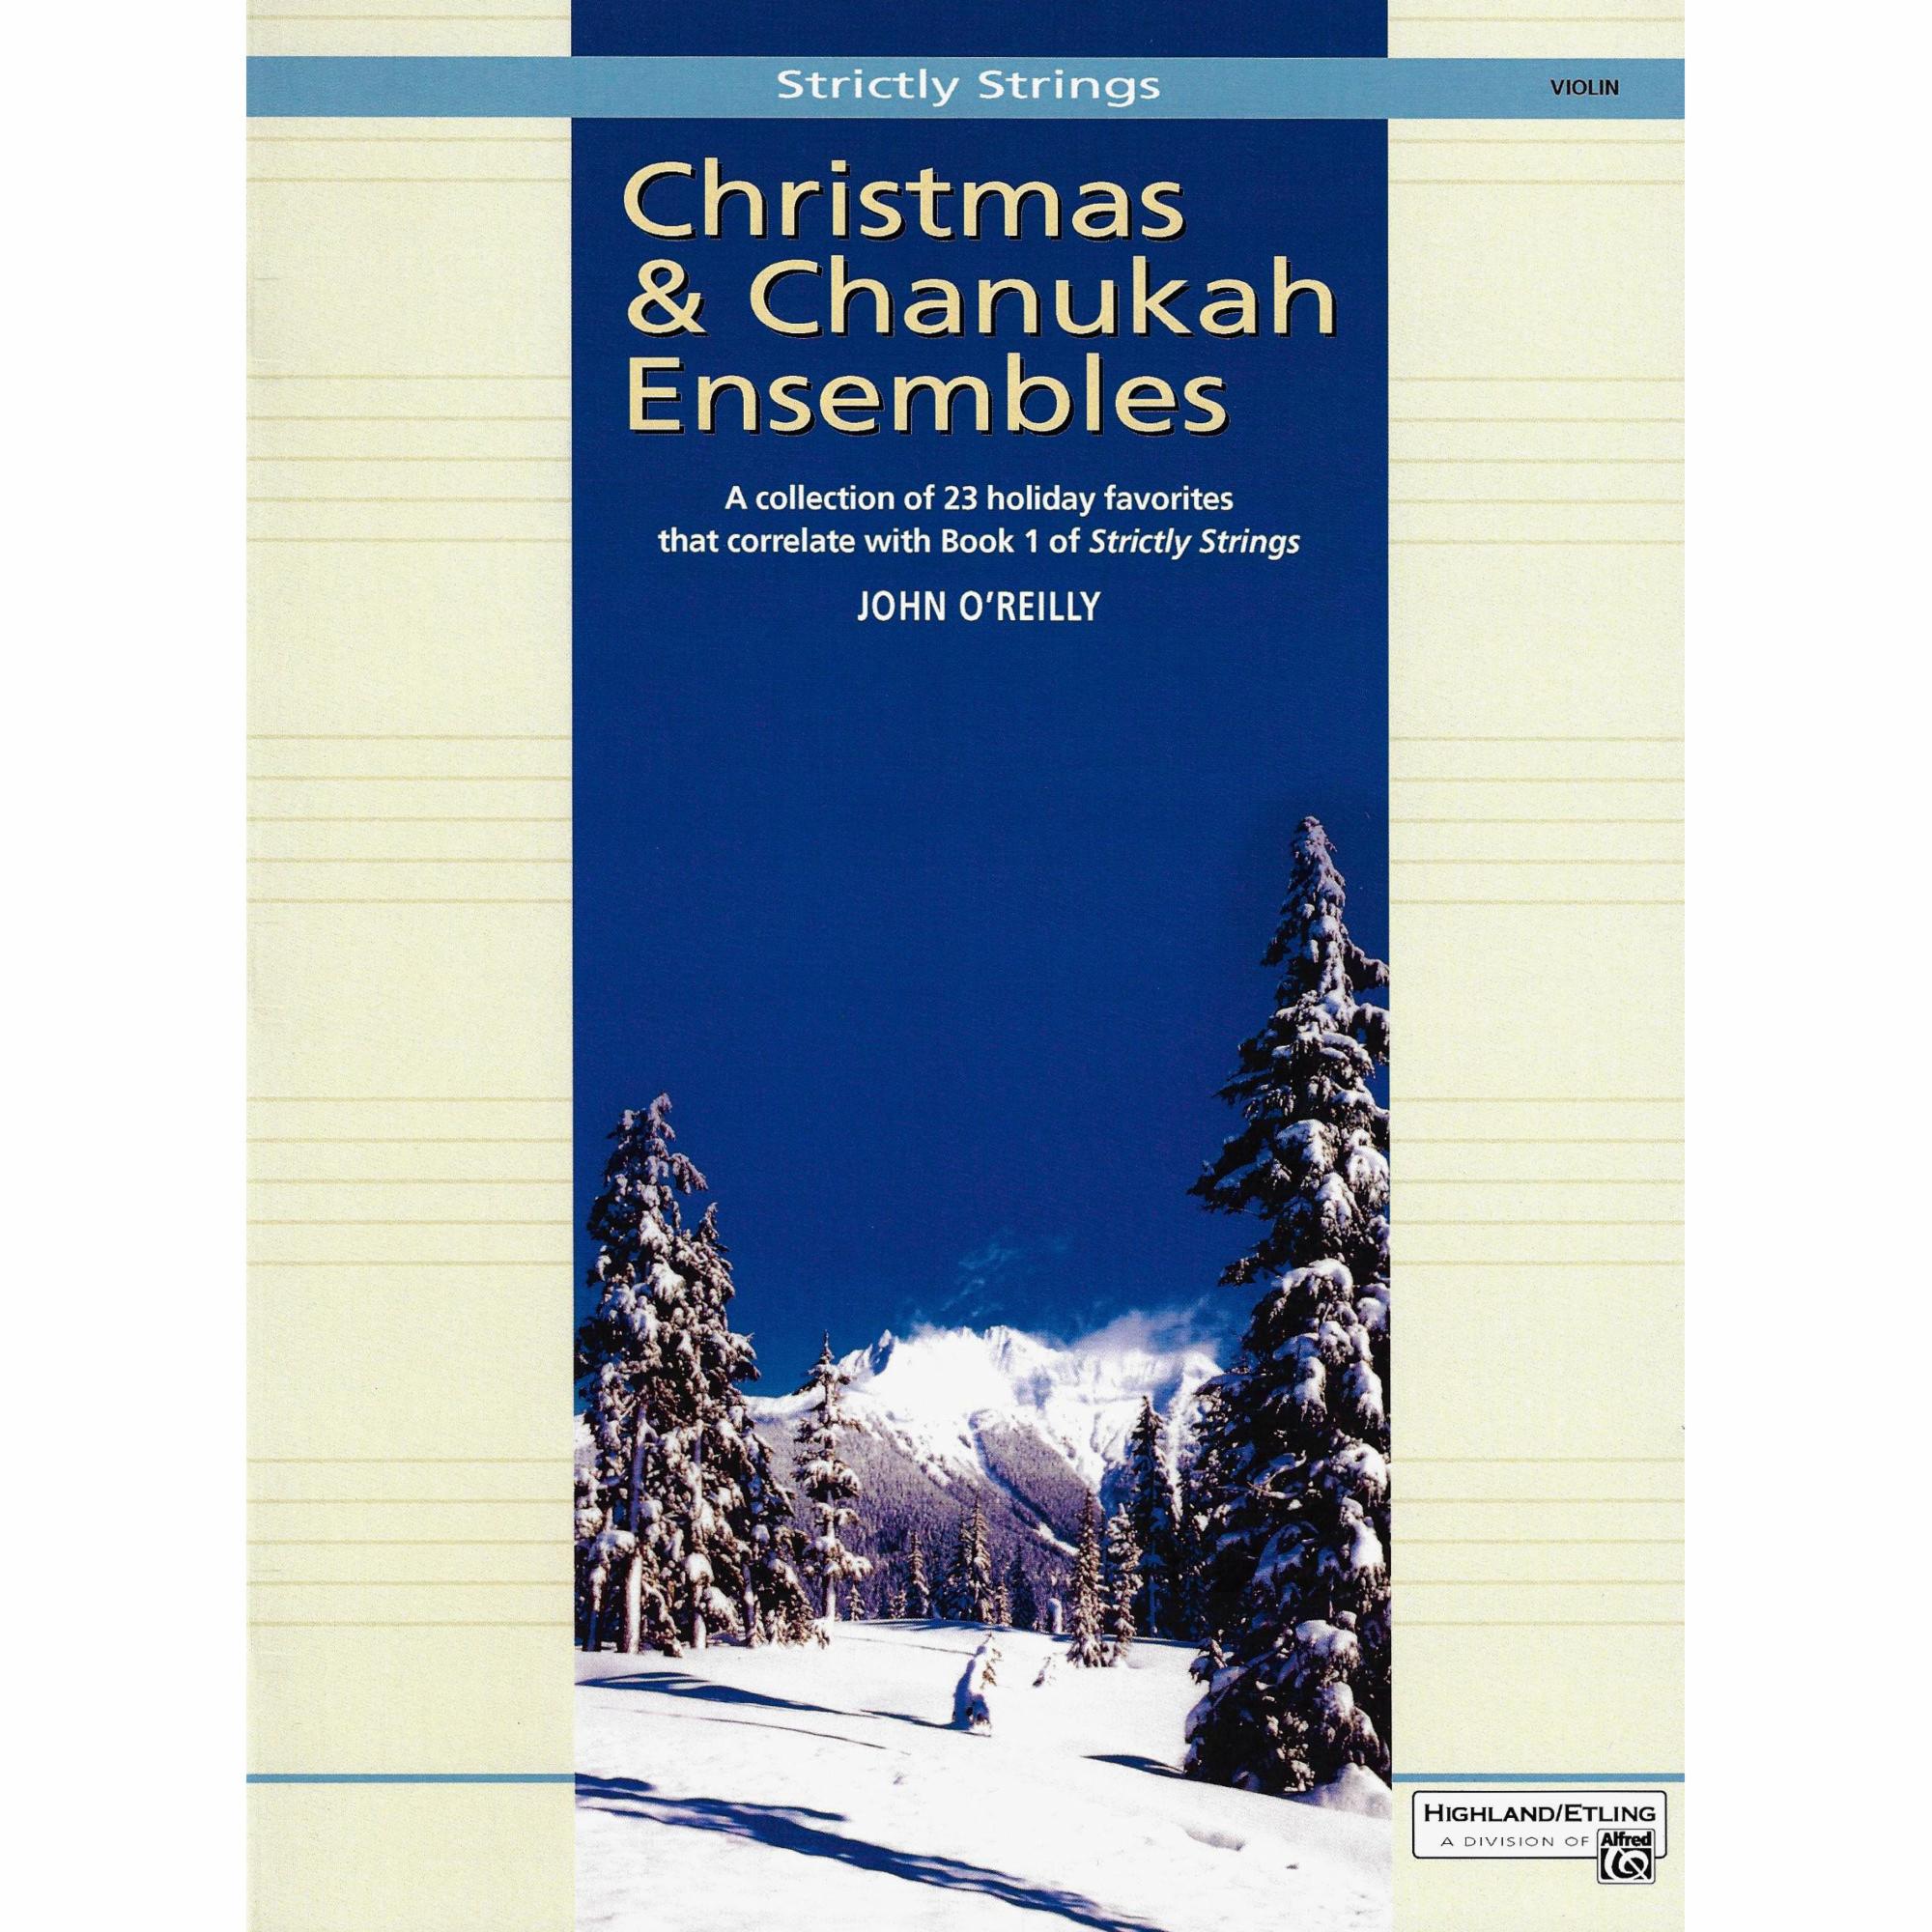 Strictly Strings: Christmas and Chanukah Ensembles